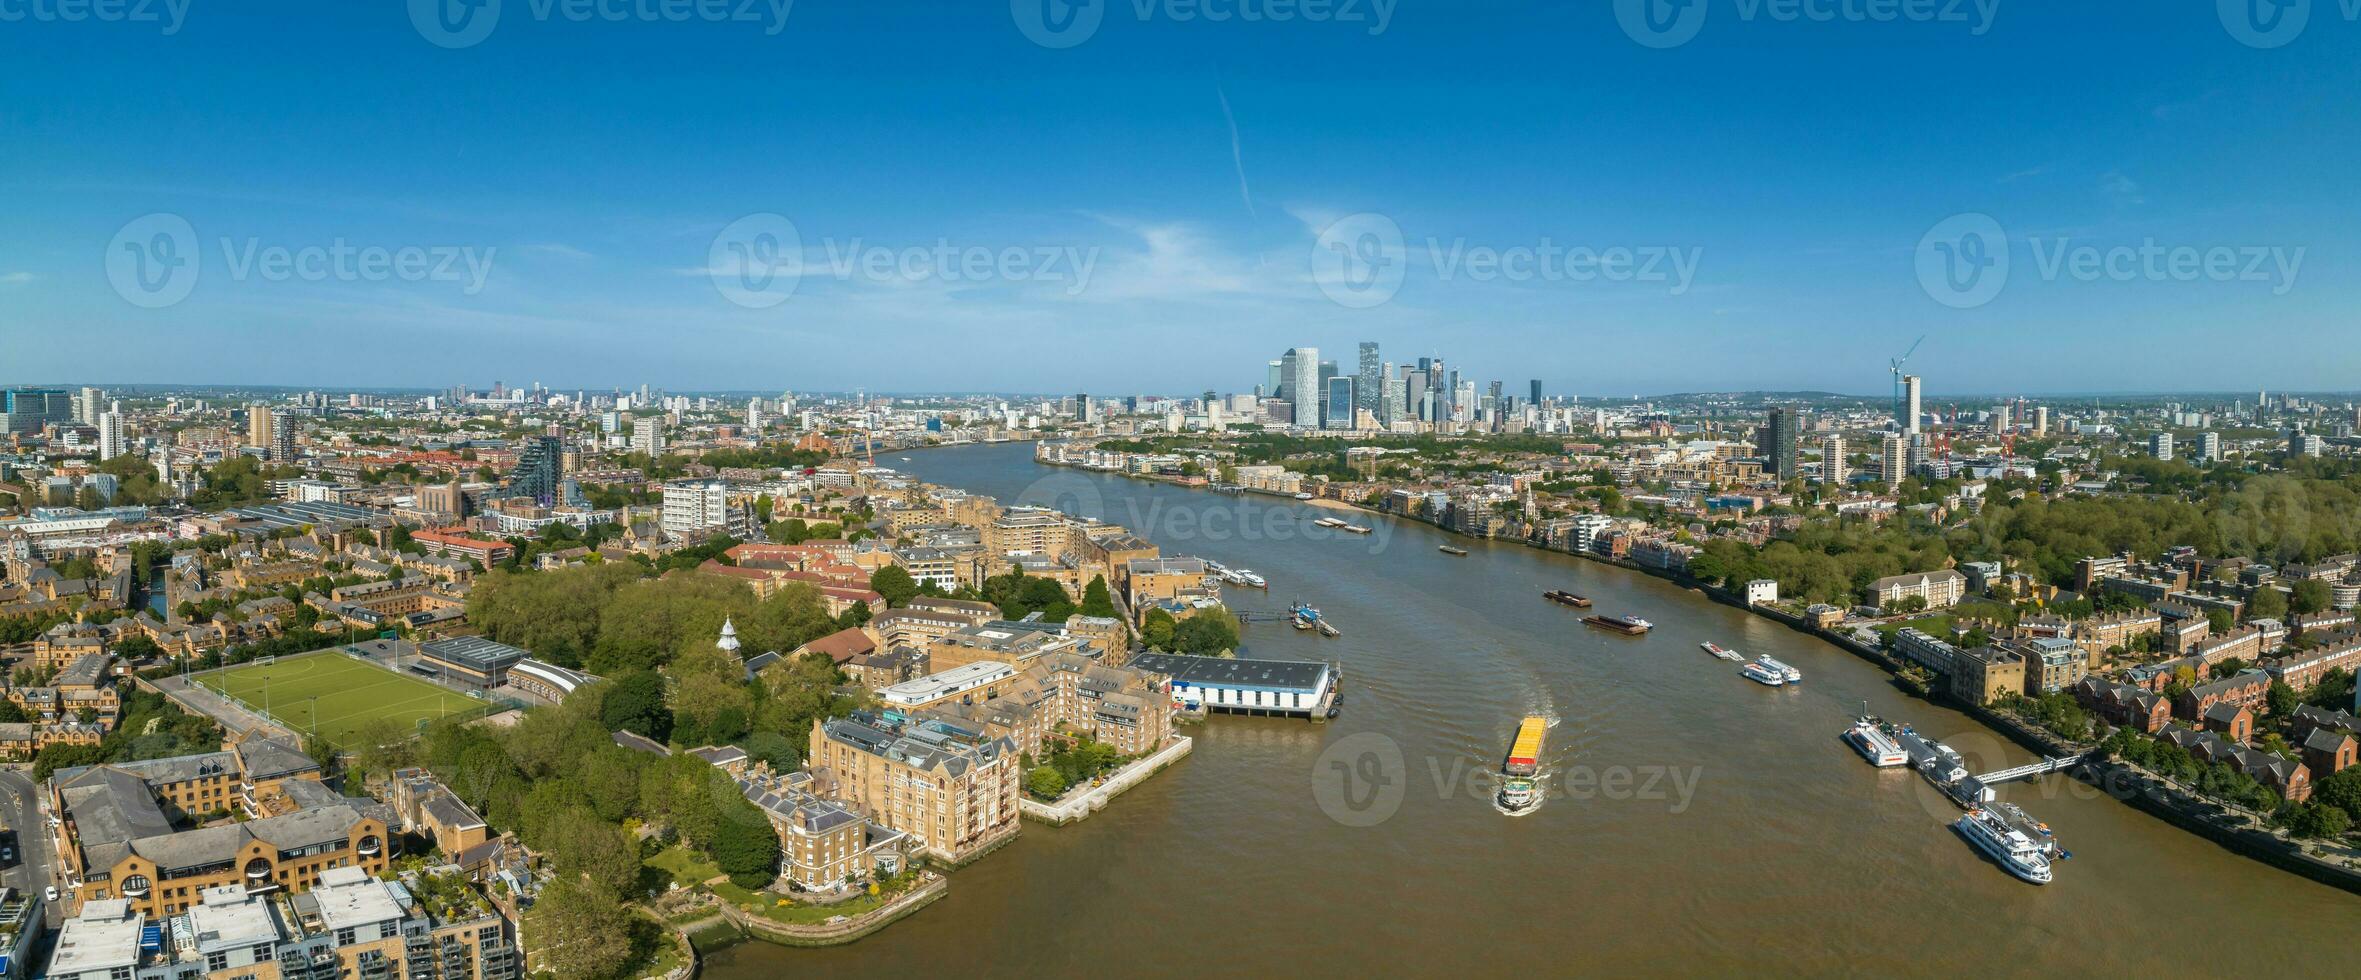 Beautiful panoramic view of London Thames river with Canary Wharf skyline on the horizon. photo